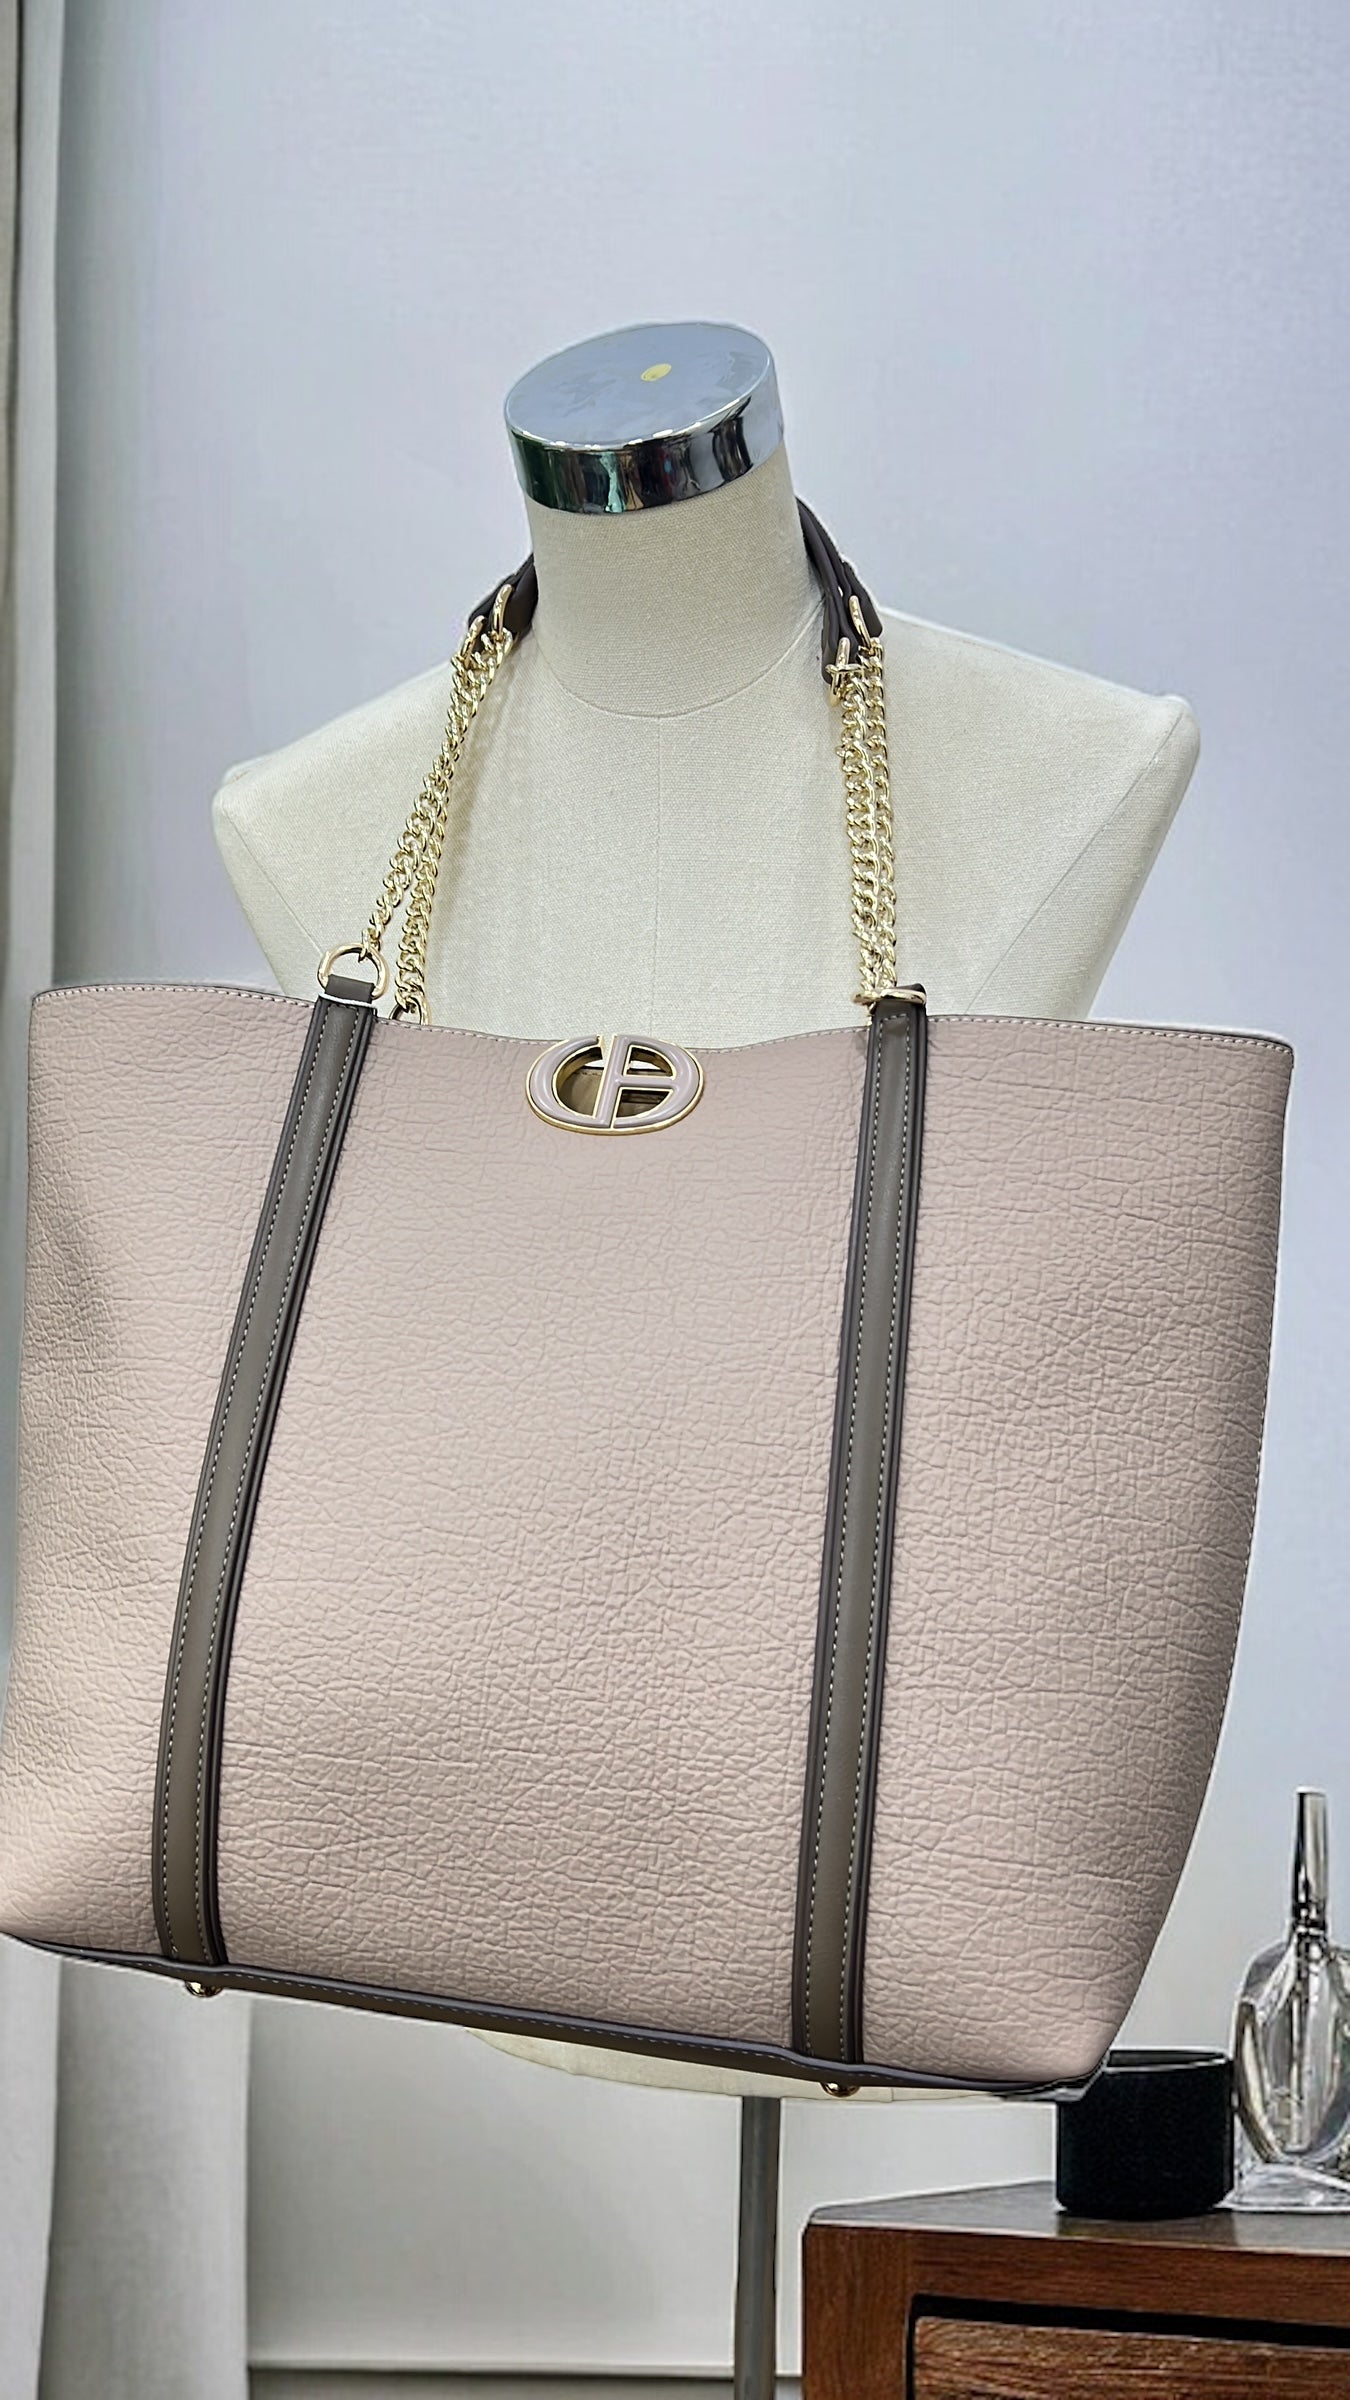 CHRISBELLA LARGE CHAIN HANDLE PANEL BAG IN APRICOT